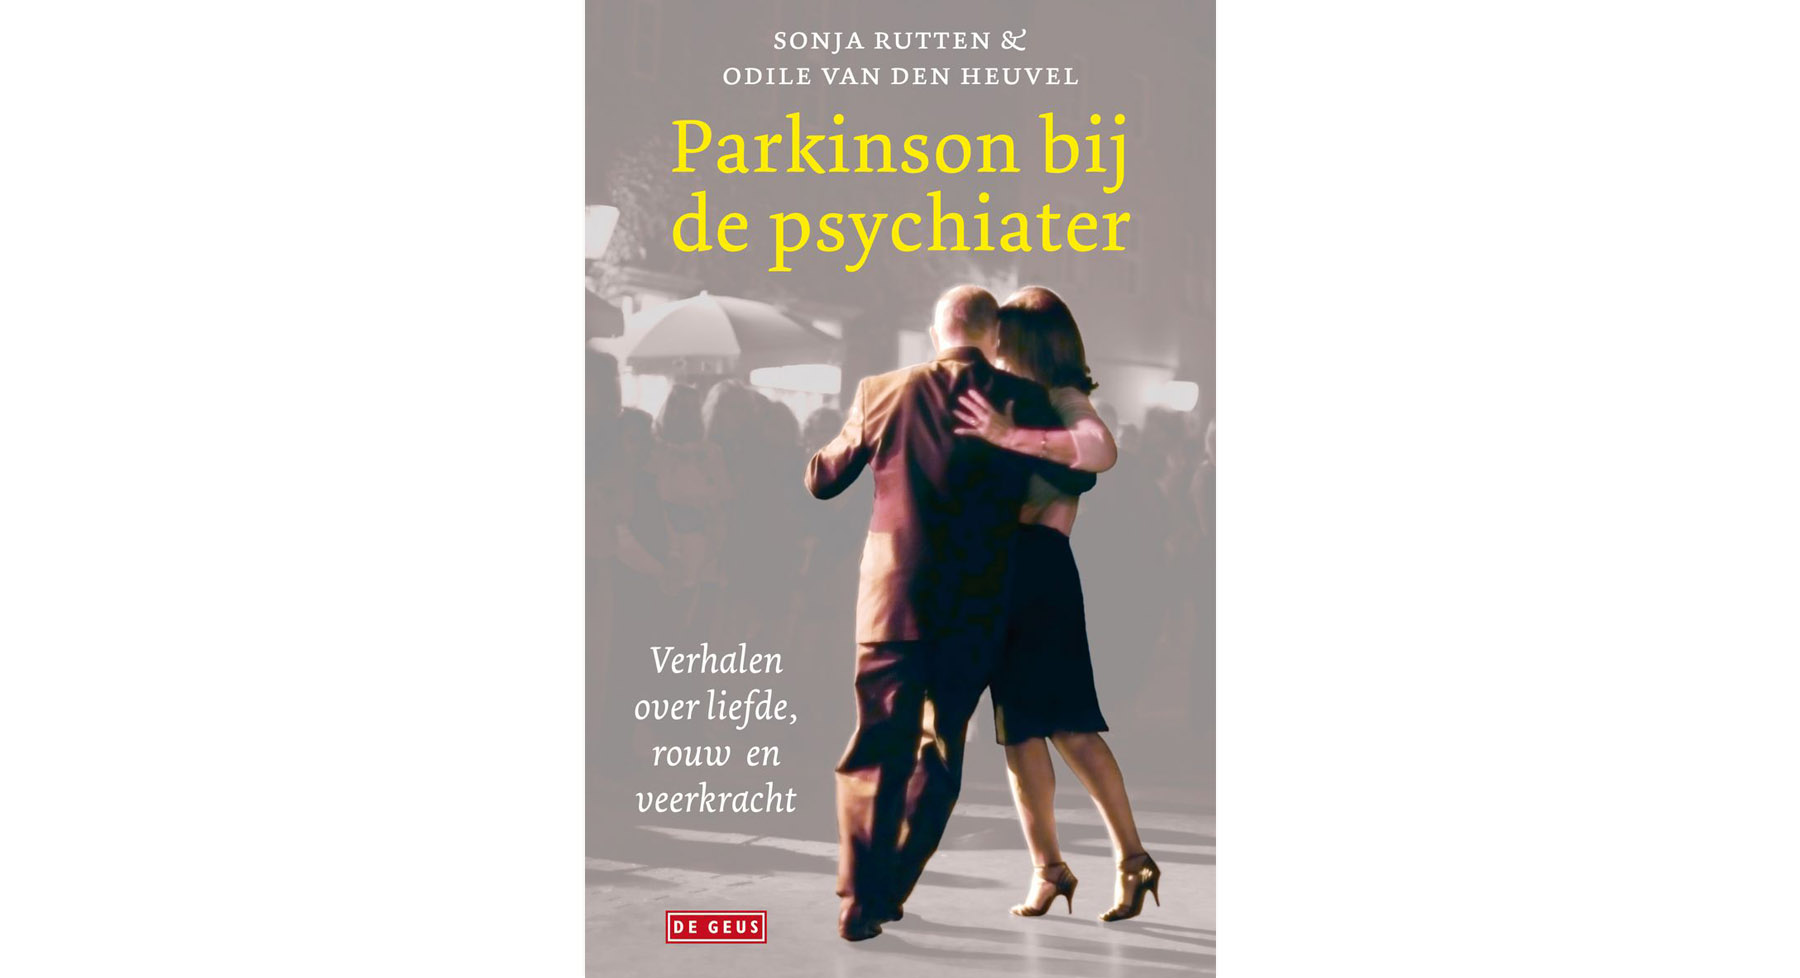 Cover of the book Parkinson's at the psychiatrist with a dancing couple.